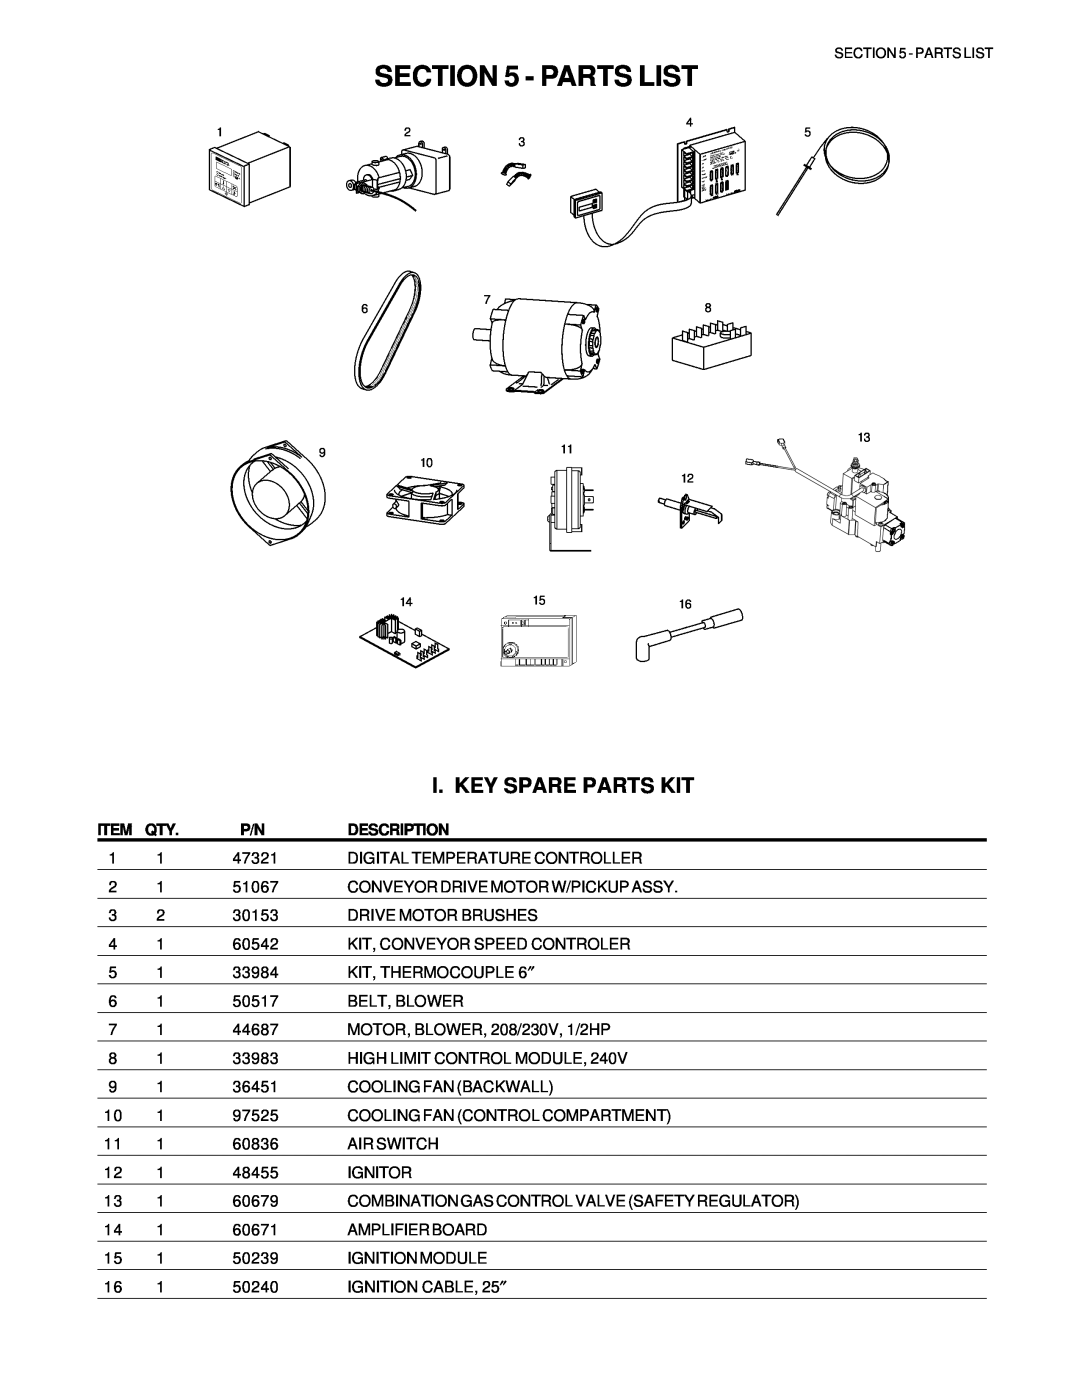 Middleby Marshall PS536GS manual Parts List, I. Key Spare Parts Kit, Description 